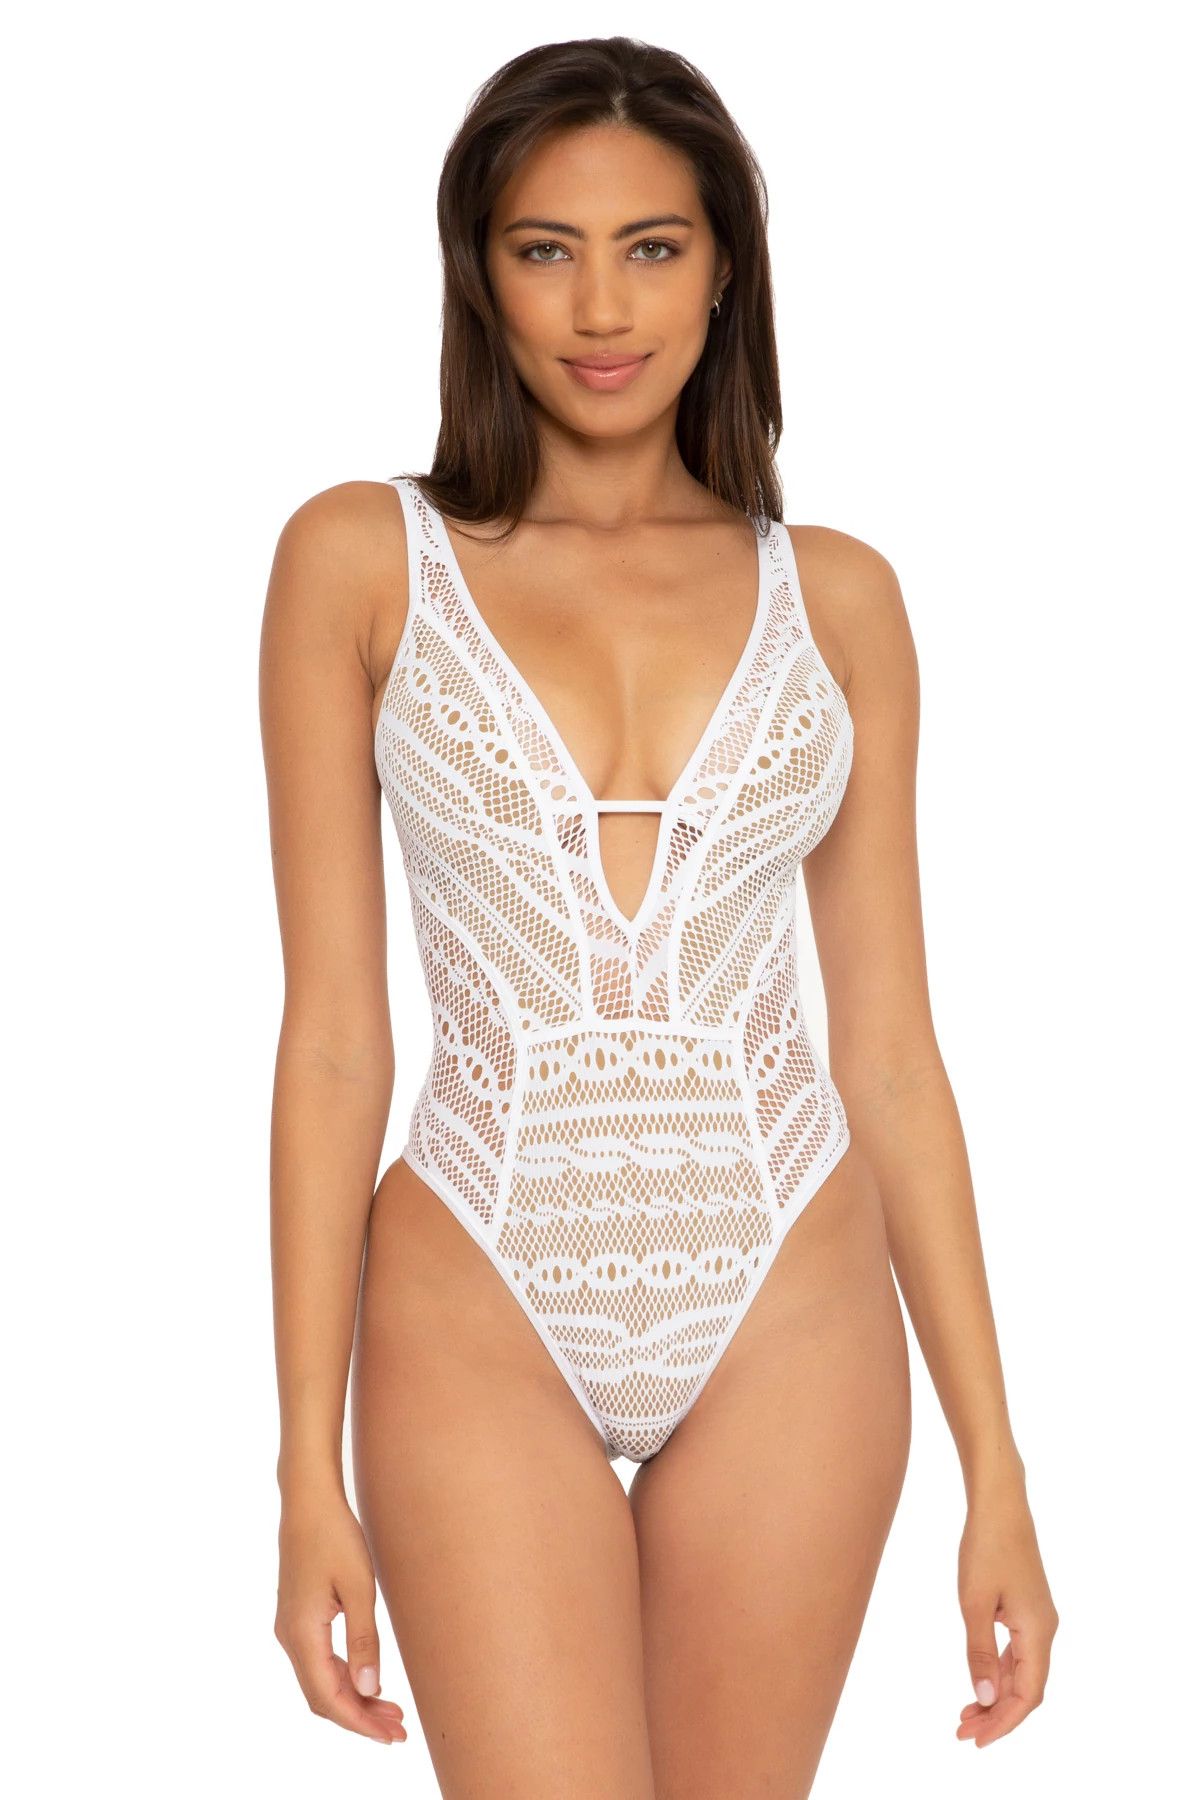 Show & Tell Plunge One Piece Swimsuit | Everything But Water